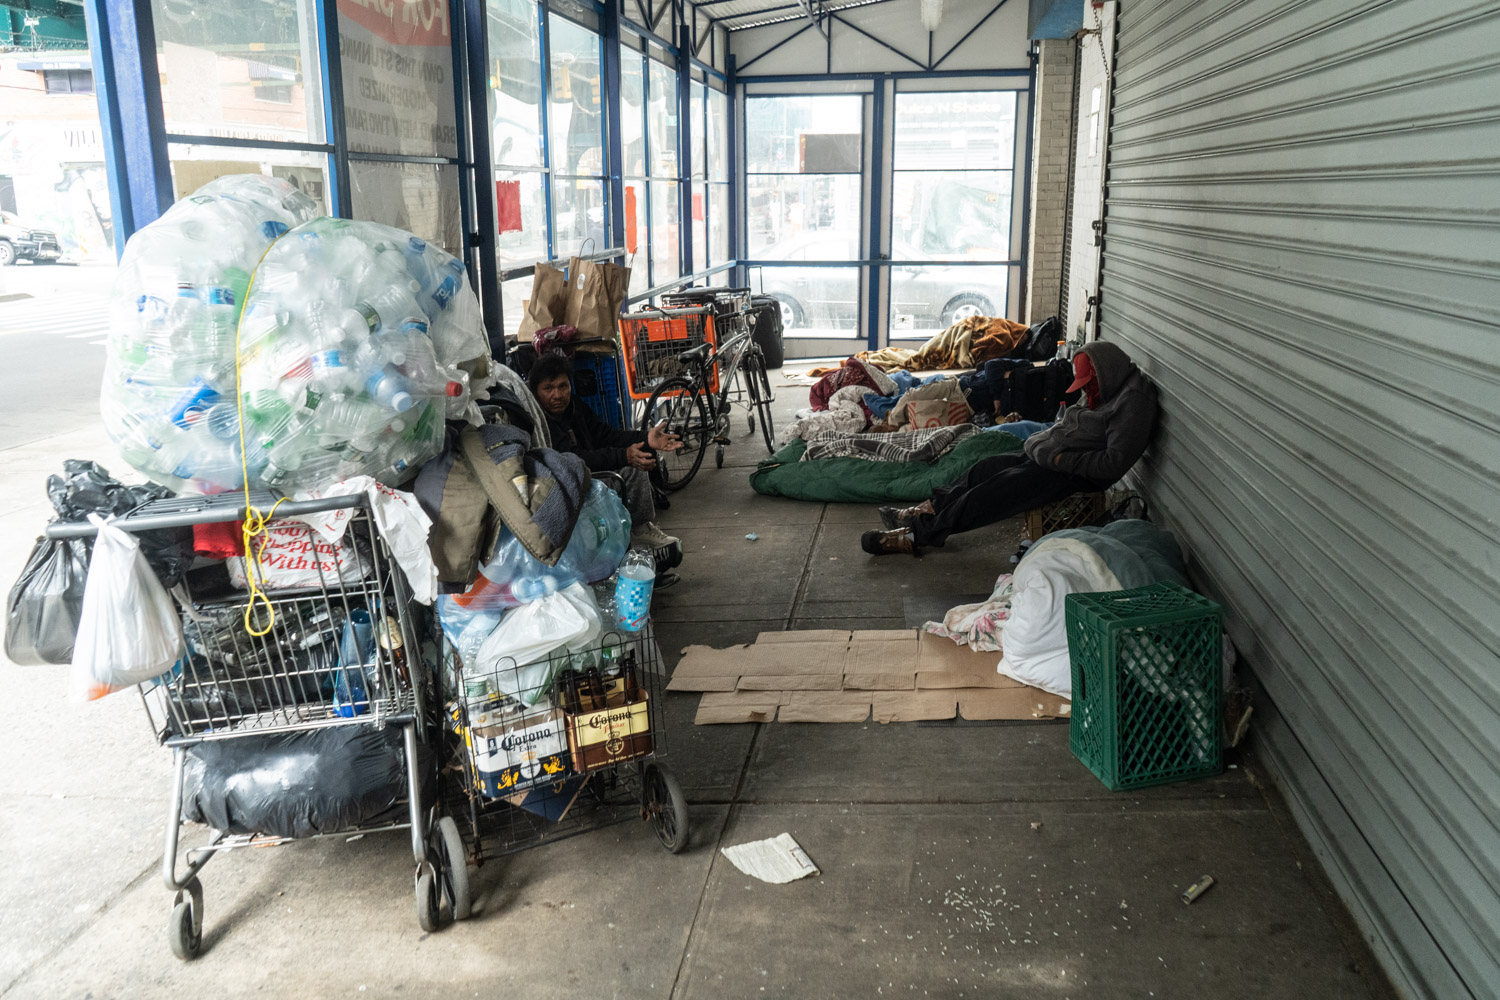 April 29, 2020: Homeless men and their shopping carts find shelter in a former discount store entryway, 78th Street at Roosevelt Avenue, Queens, New York. © Camilo José Vergara